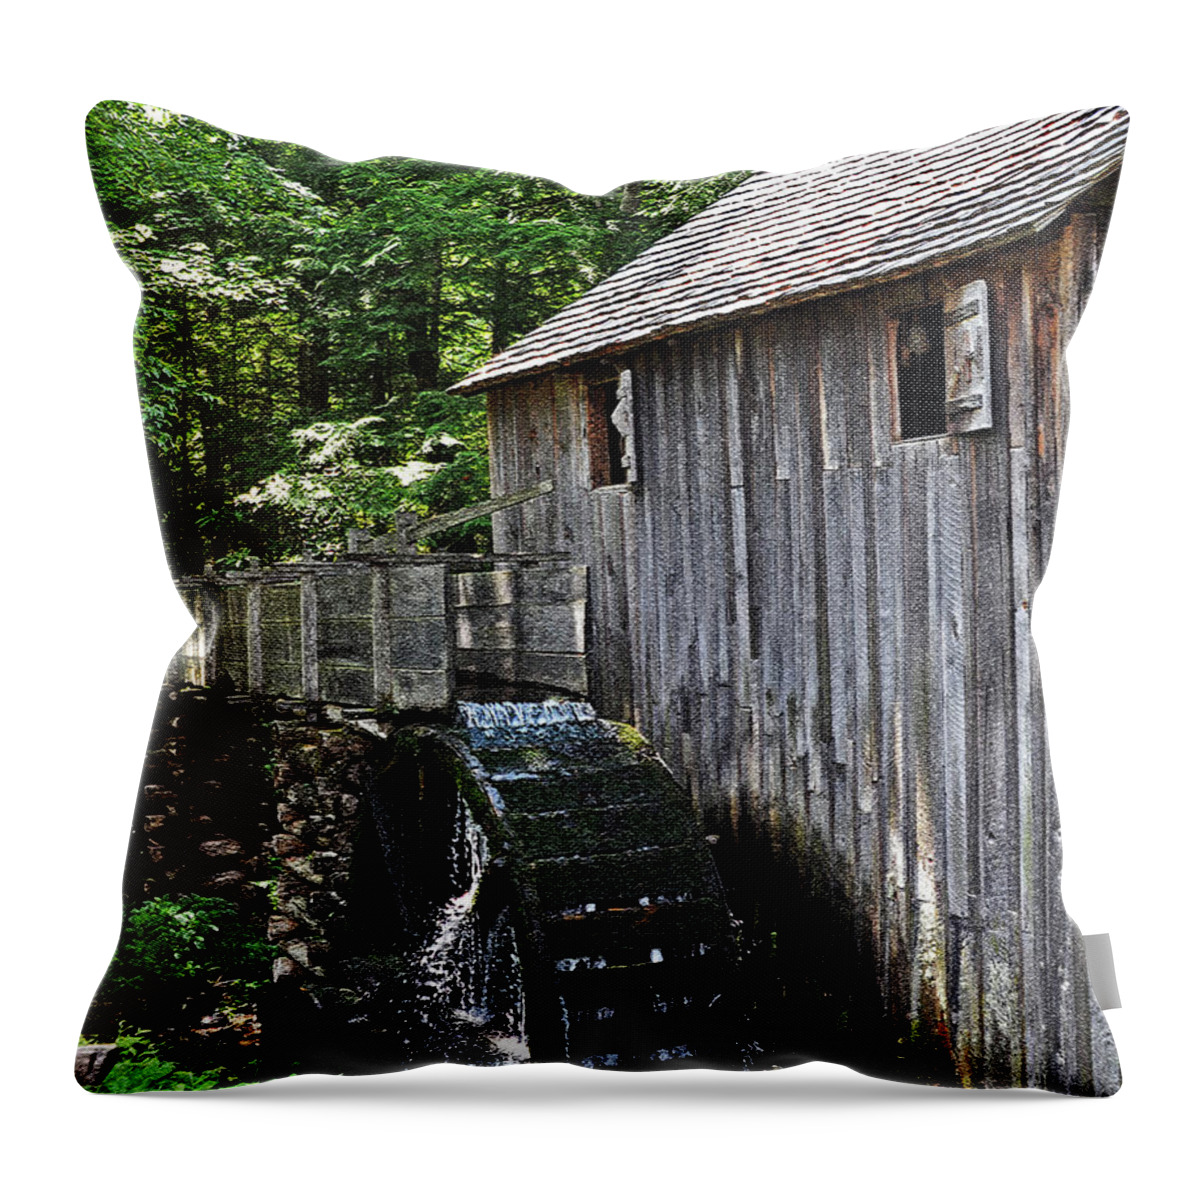 Cades Cove Throw Pillow featuring the photograph Cable Grist Mill 4 by Lydia Holly